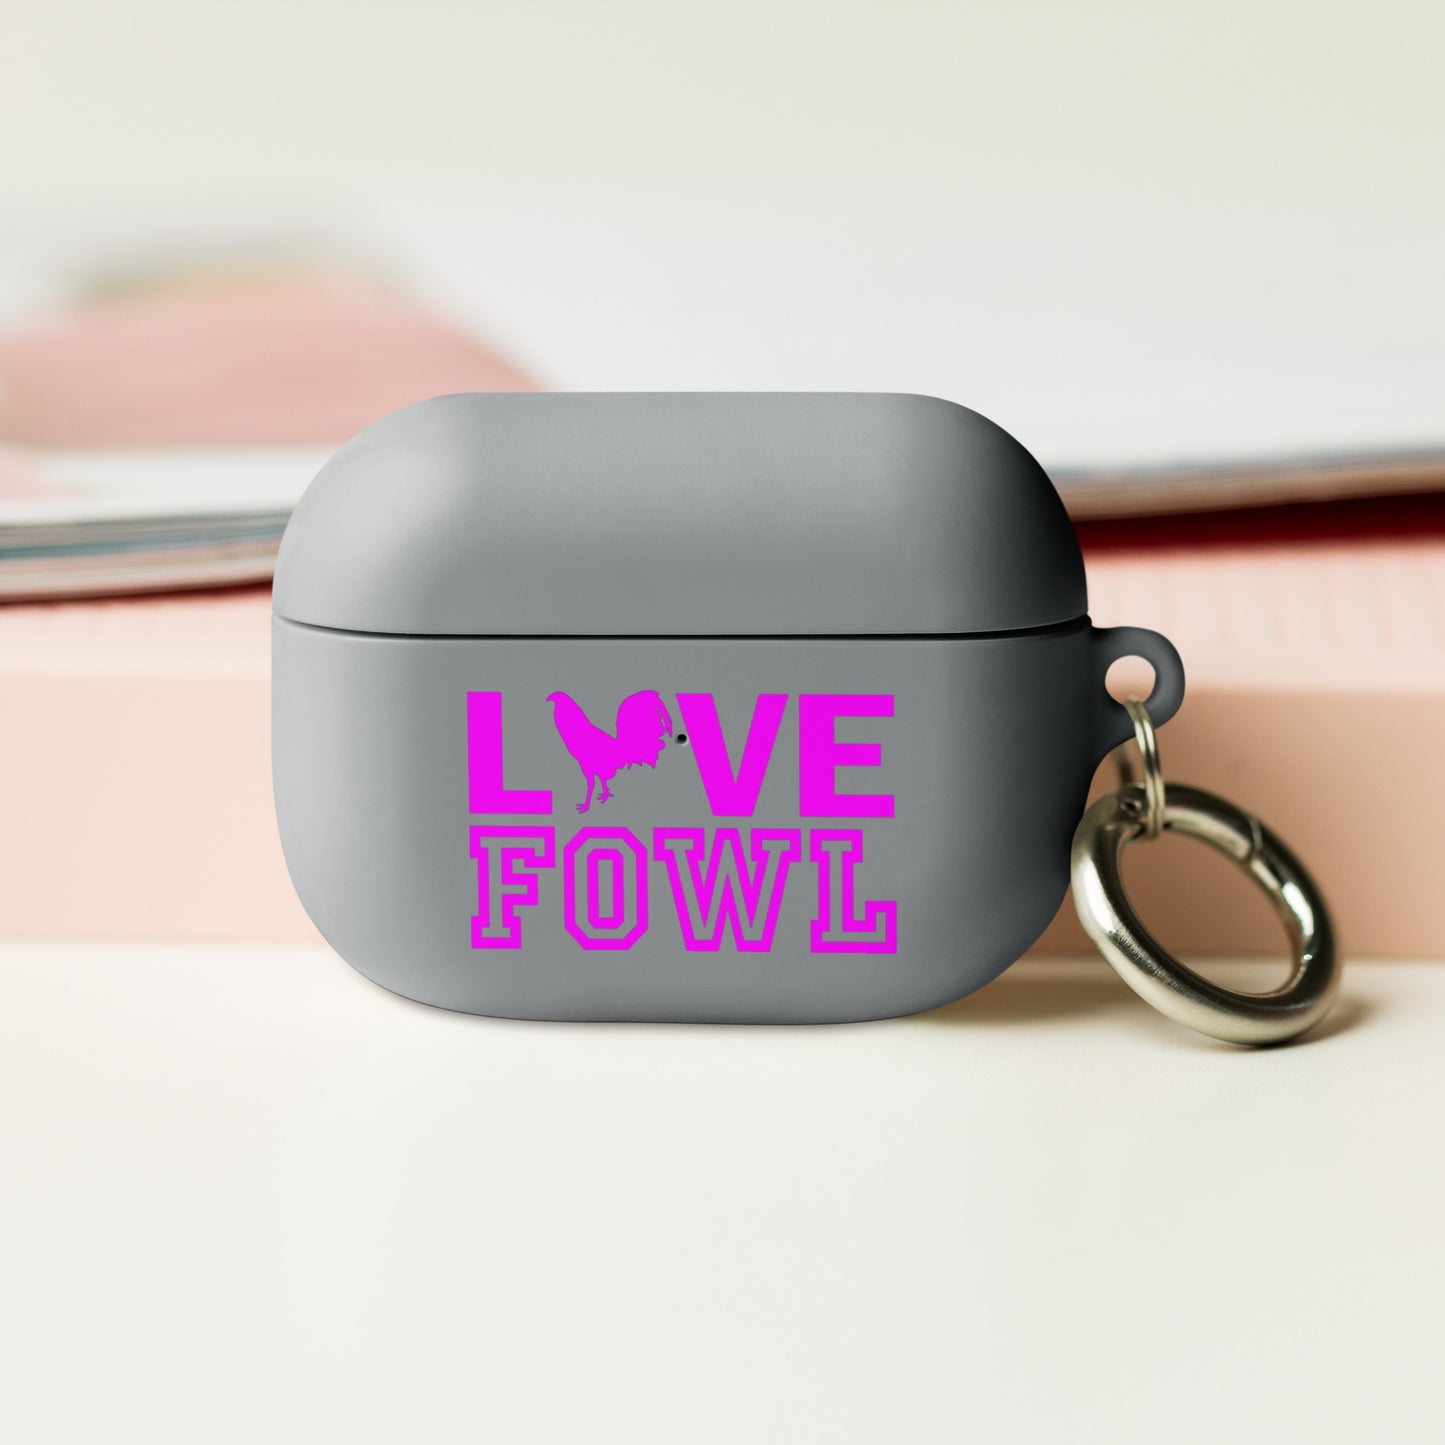 VS LOVE FOWL PINK Gamefowl Rooster AirPods Case